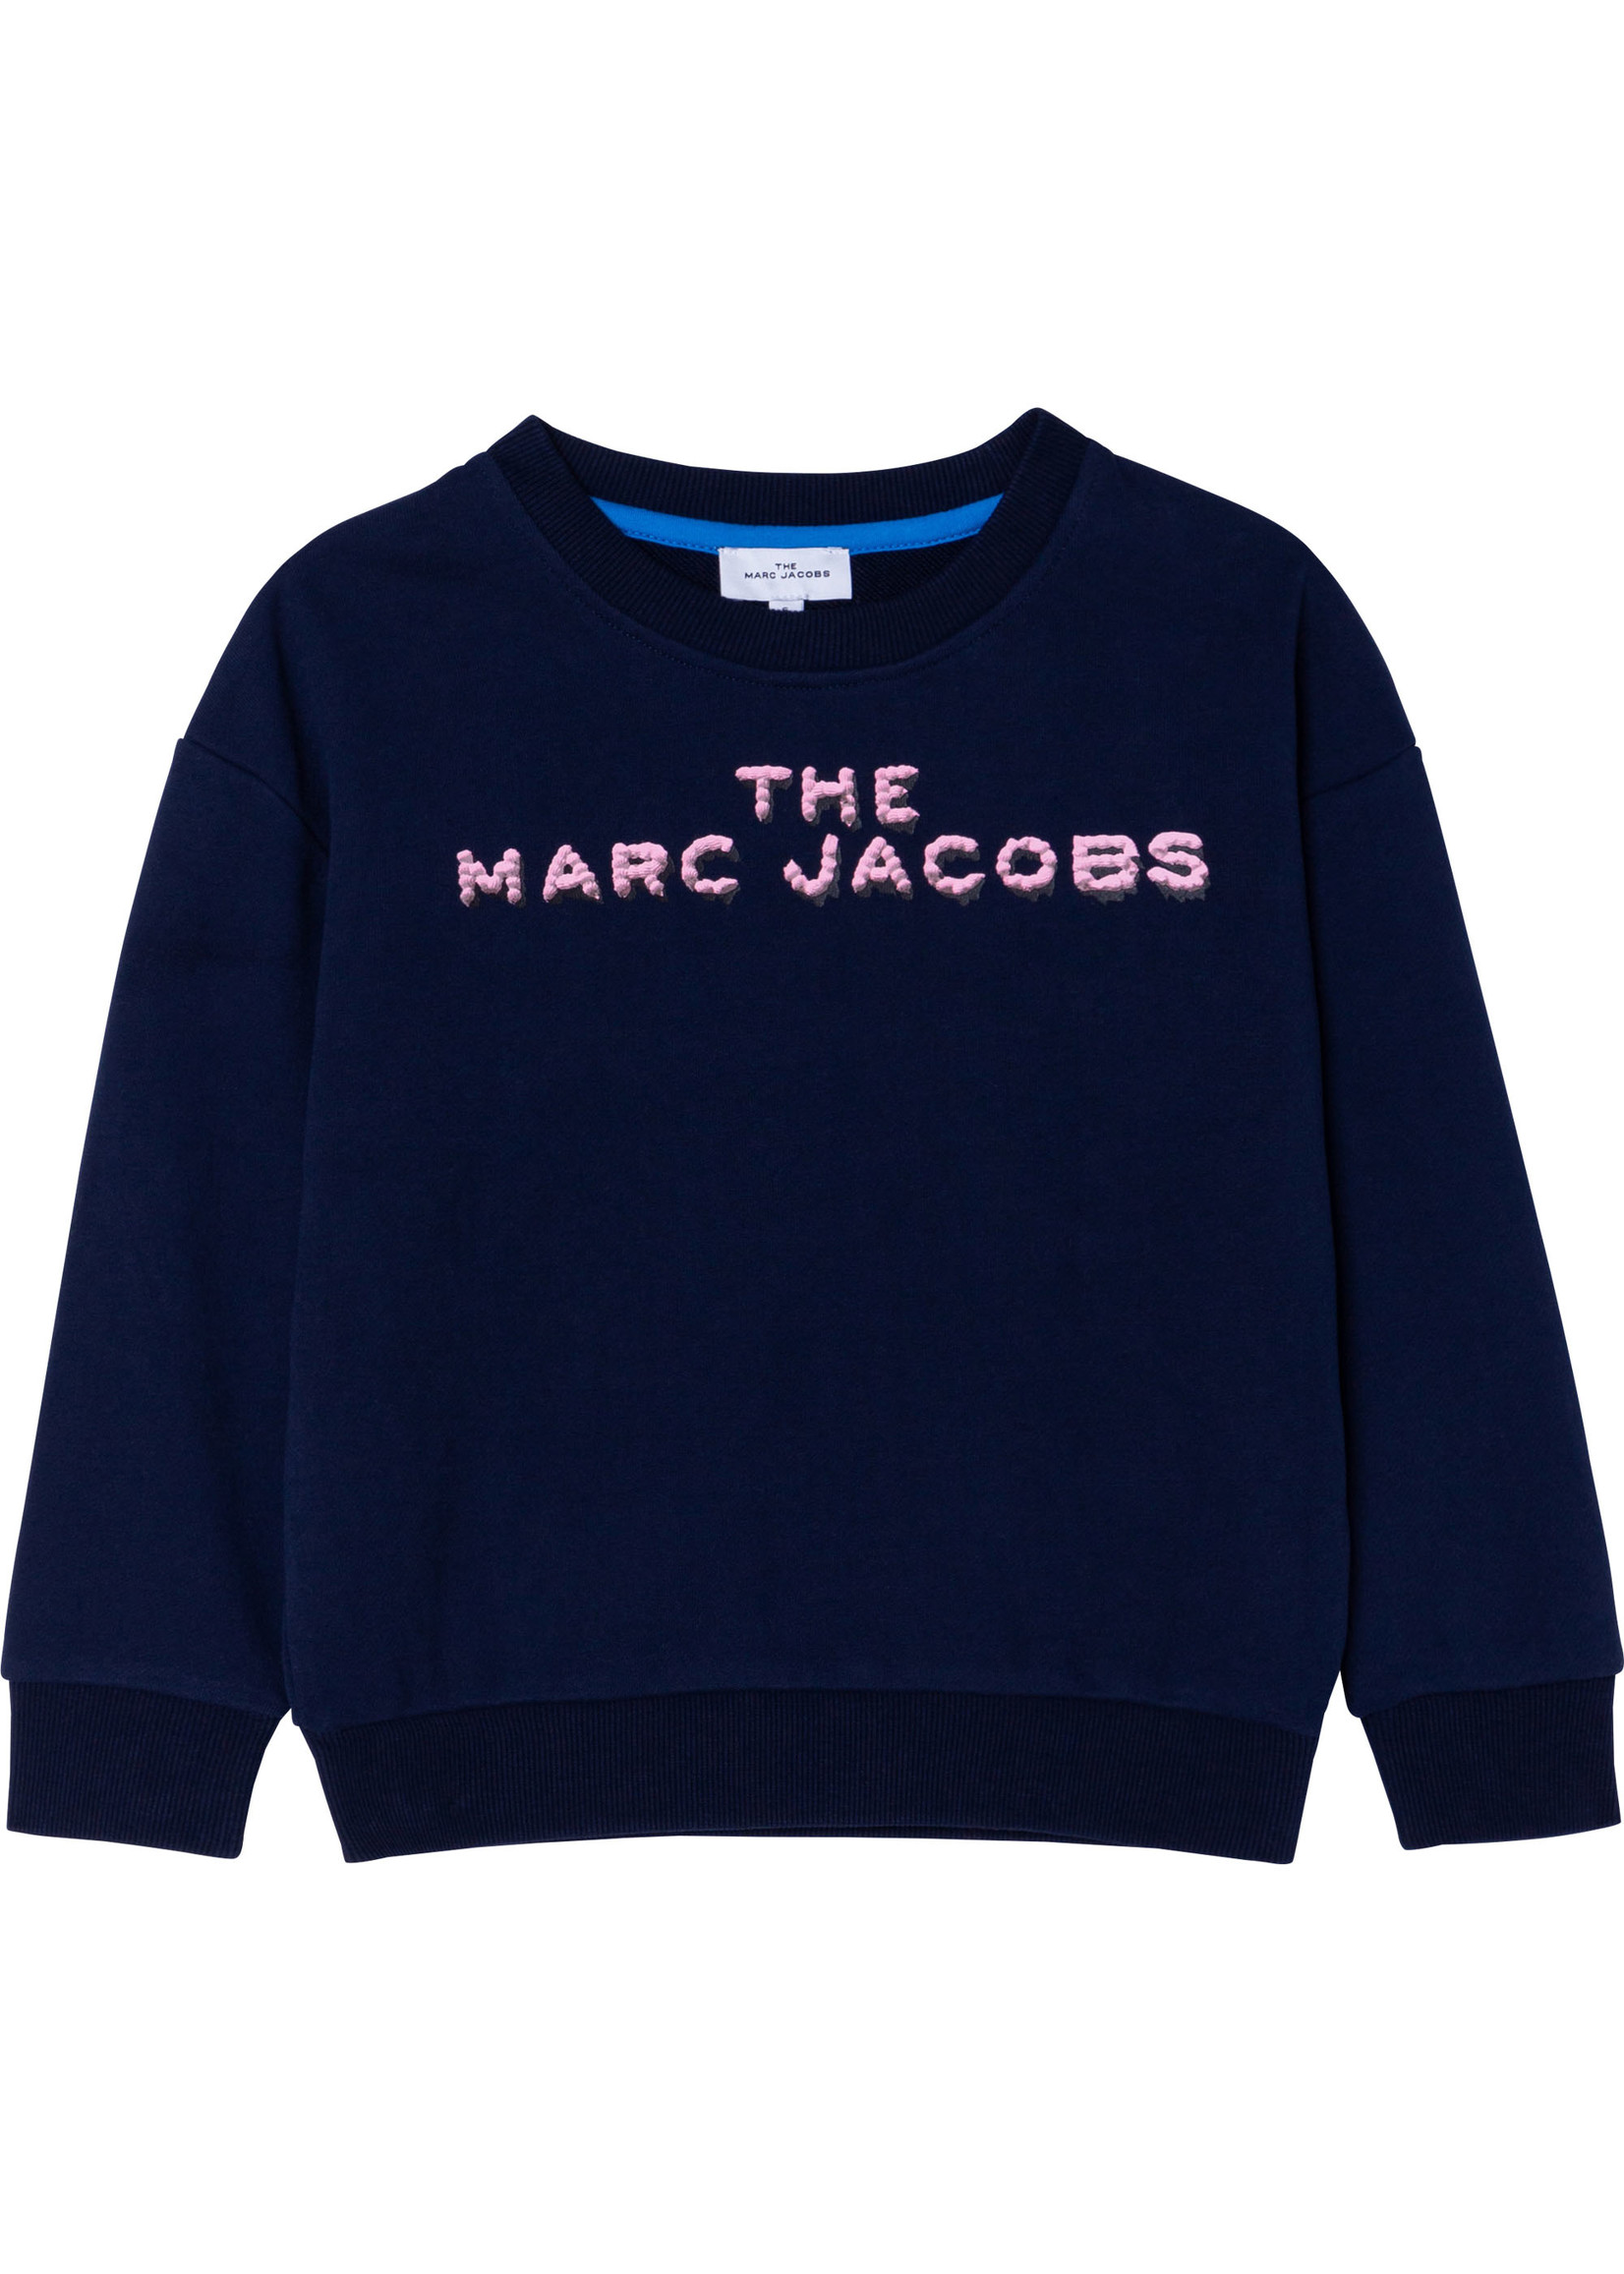 Marc Jacobs MARC JACOBS sweater navyblue - W15573